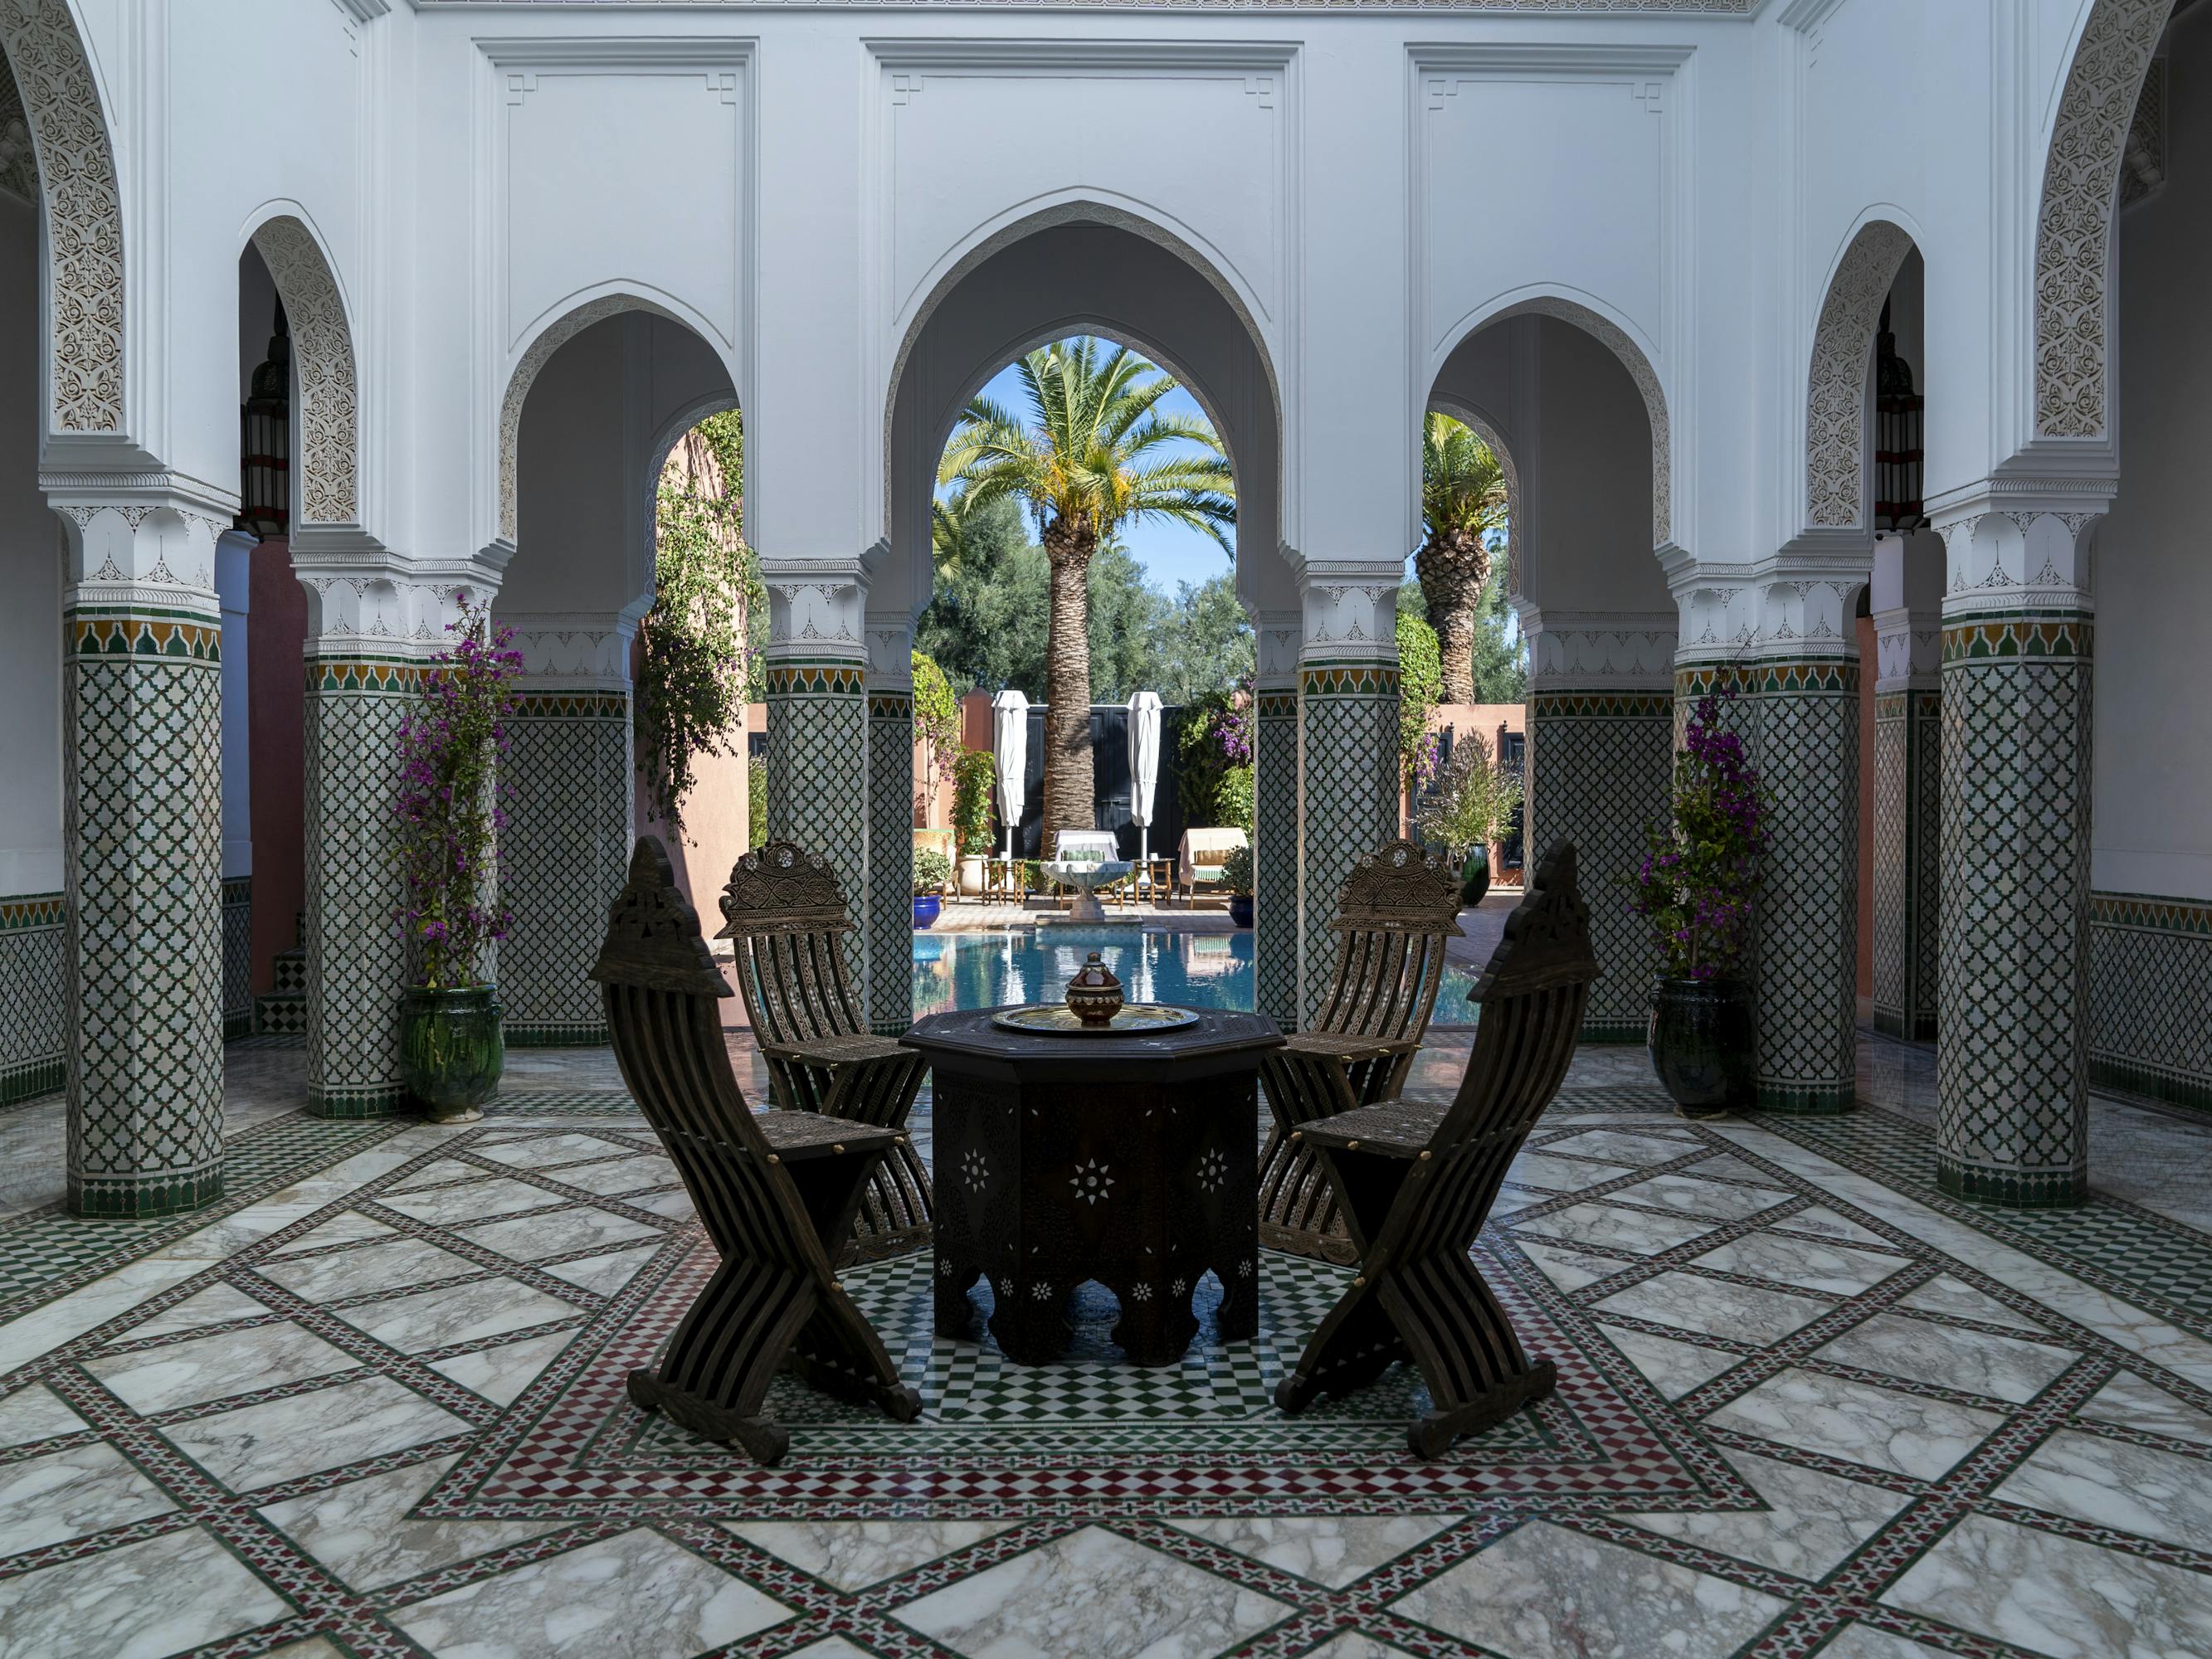 La Mamounia hotel! There is a black table at center, flanked by four chairs. There are pillars surrounding this nook, and a pool can be seen through the pillars.